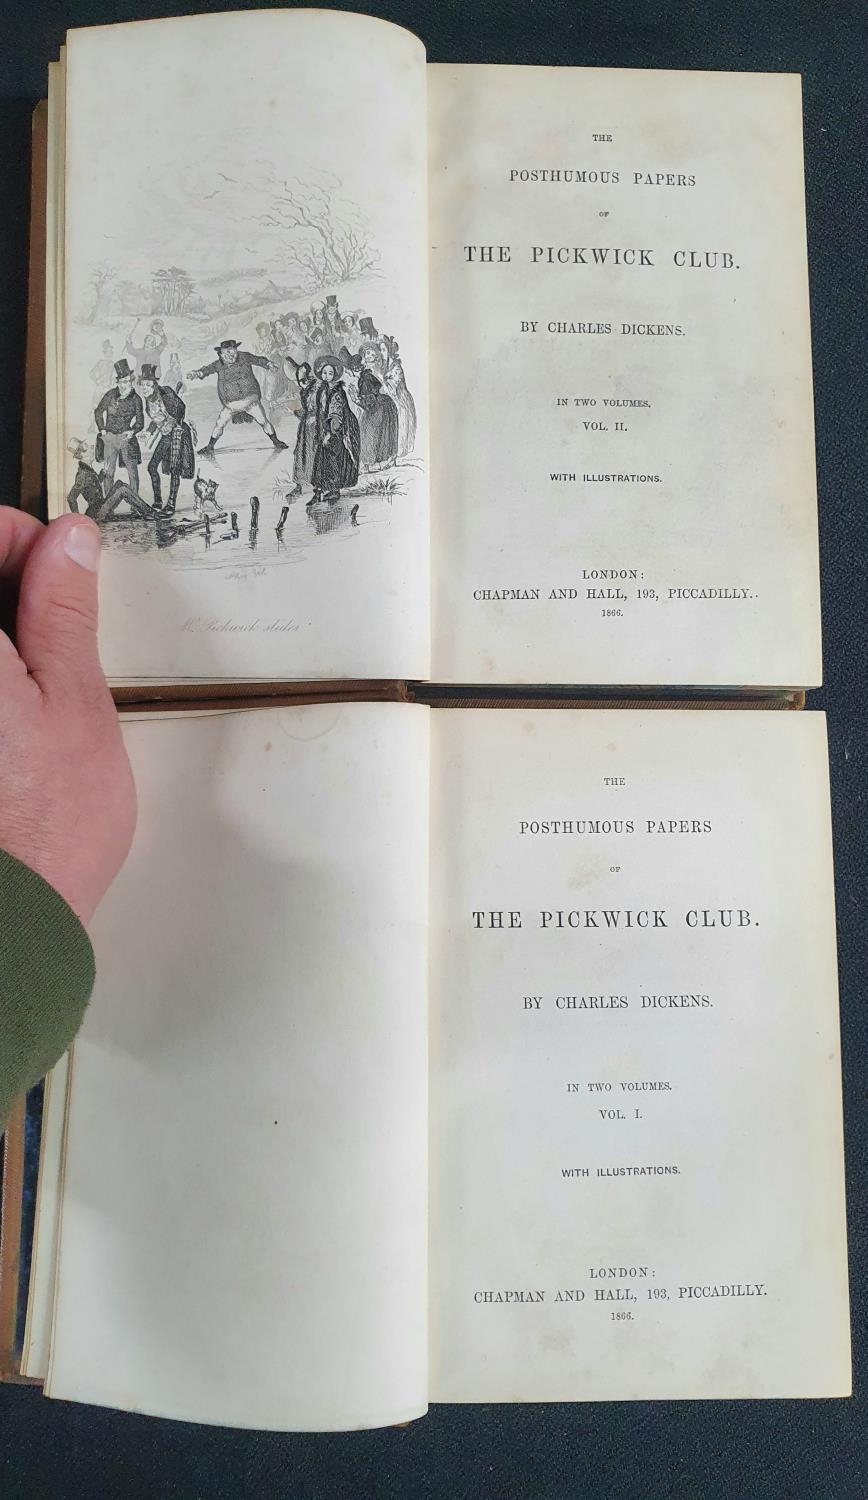 The Posthumus papers of the Pickwick club volumes I & II, 1866 Library edition by Charles Dickens - Image 7 of 9